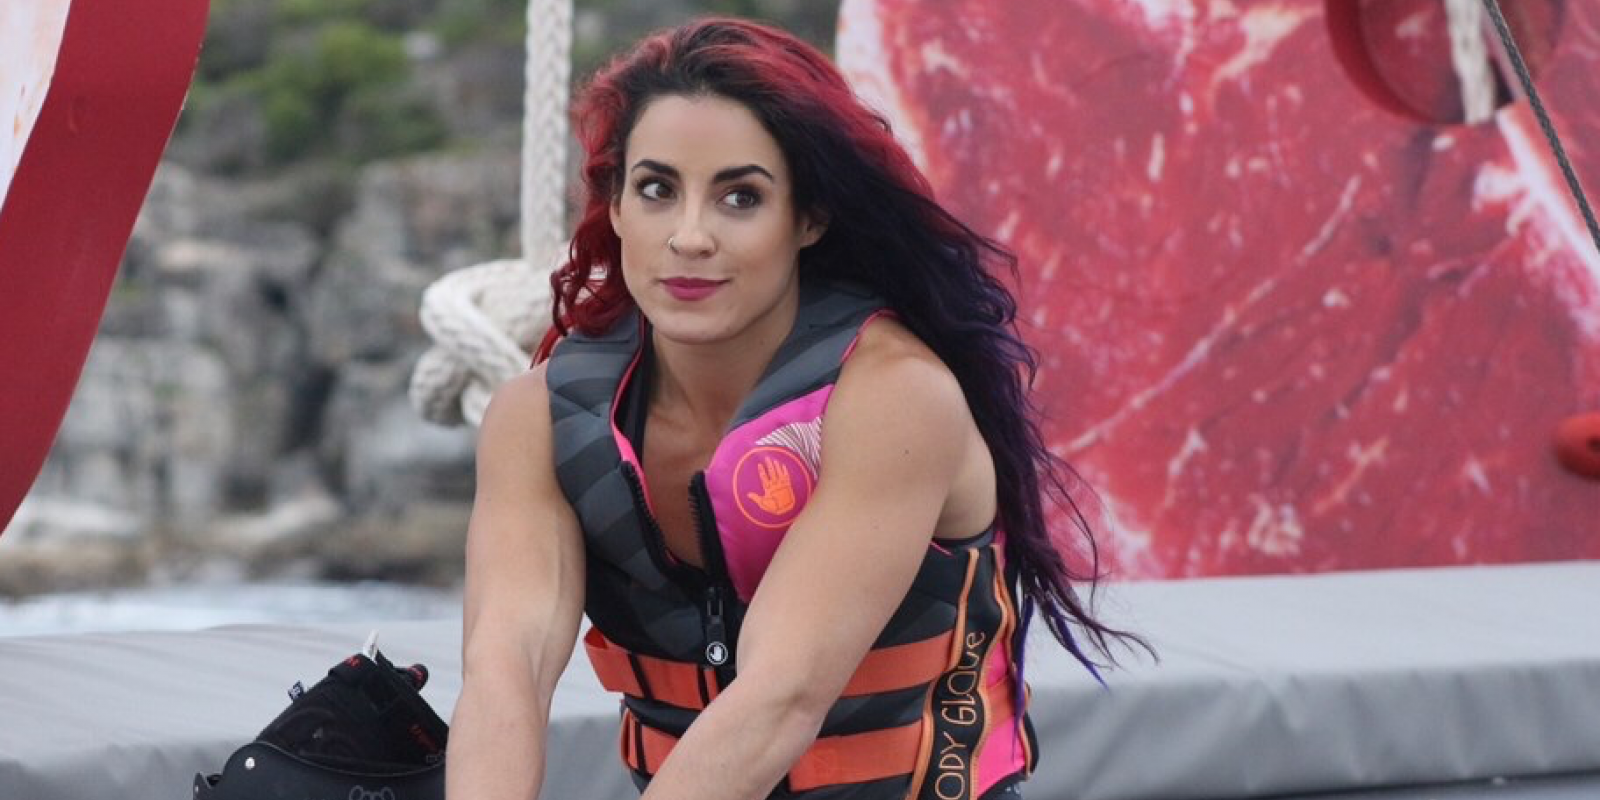 Cara Maria Sorbello competes in The Challenge